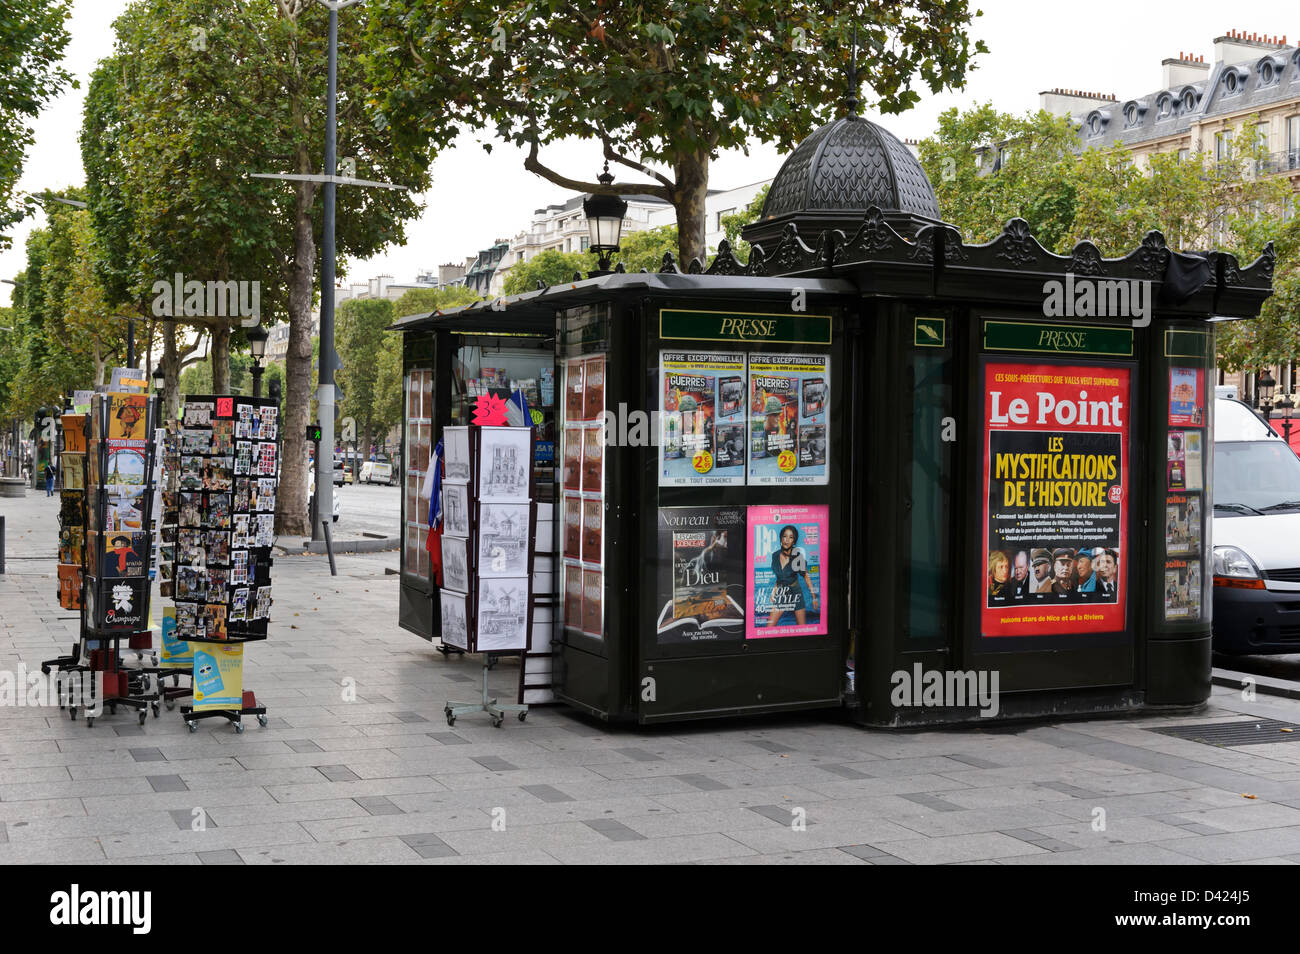 Newspaper Kiosk selling Newspaper and Touristic Items, Champs Elysees, Paris, France. Stock Photo